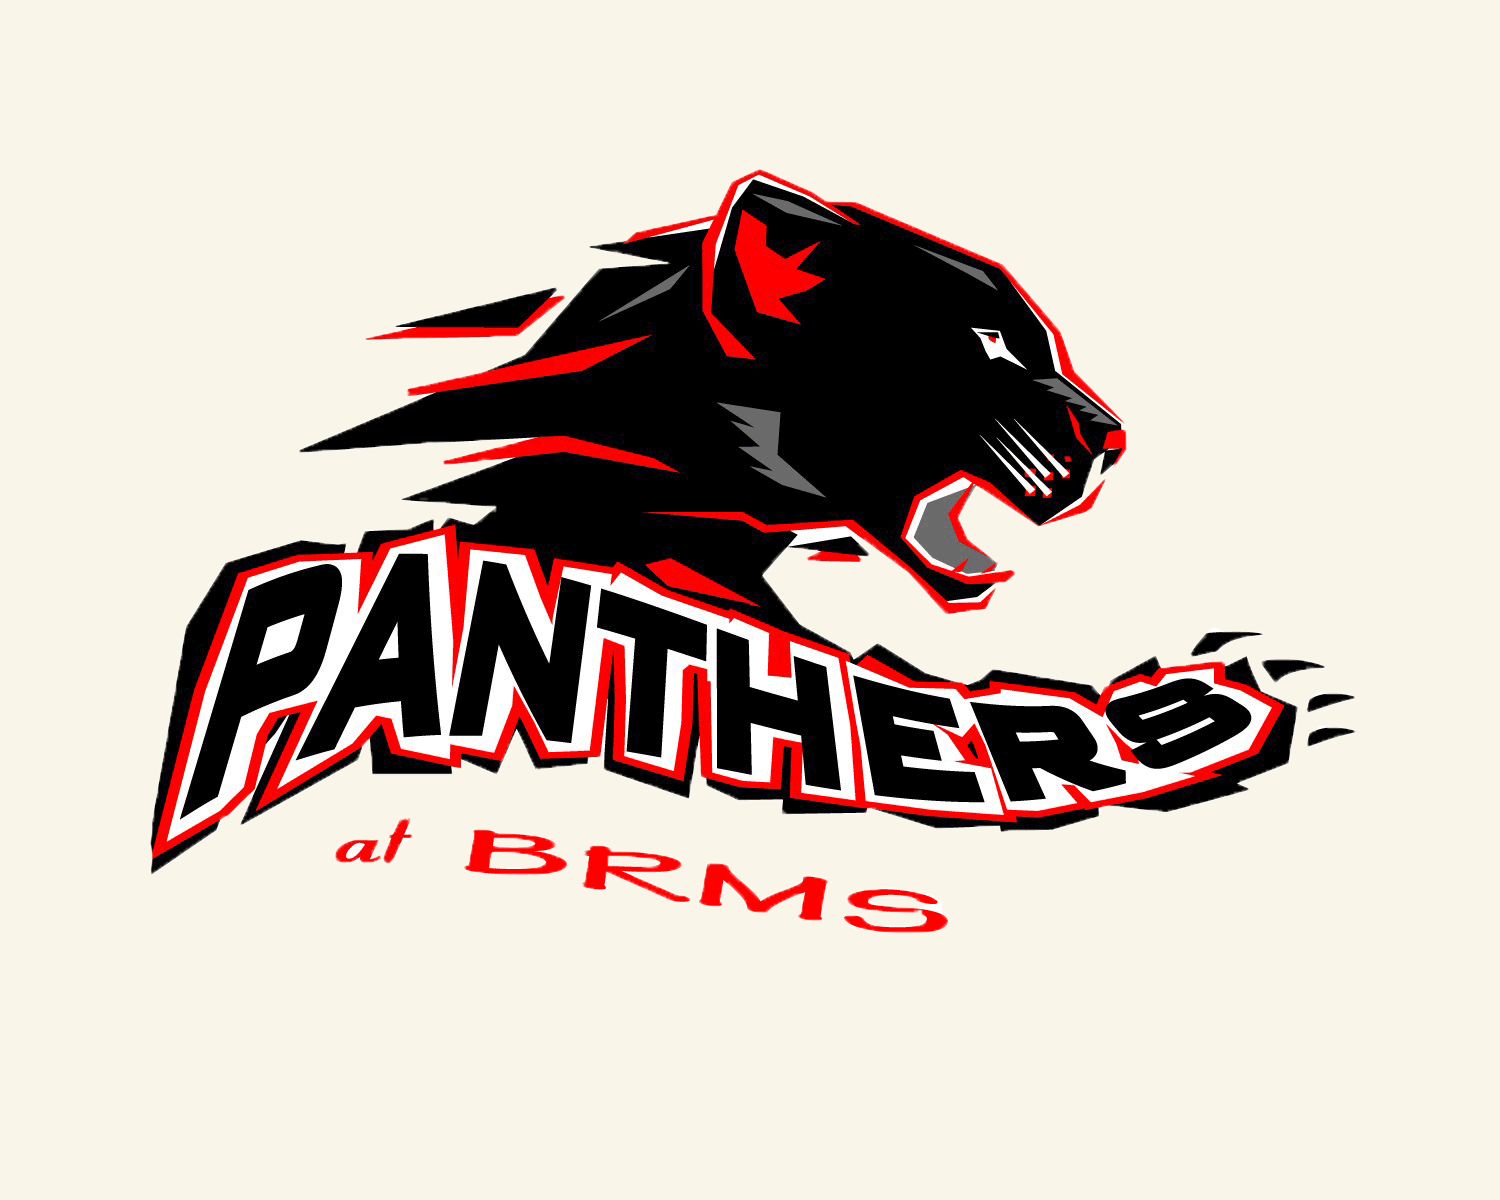 Red Panther Logo - panther logo HD Wallpaper Download Free for HD, High Quality